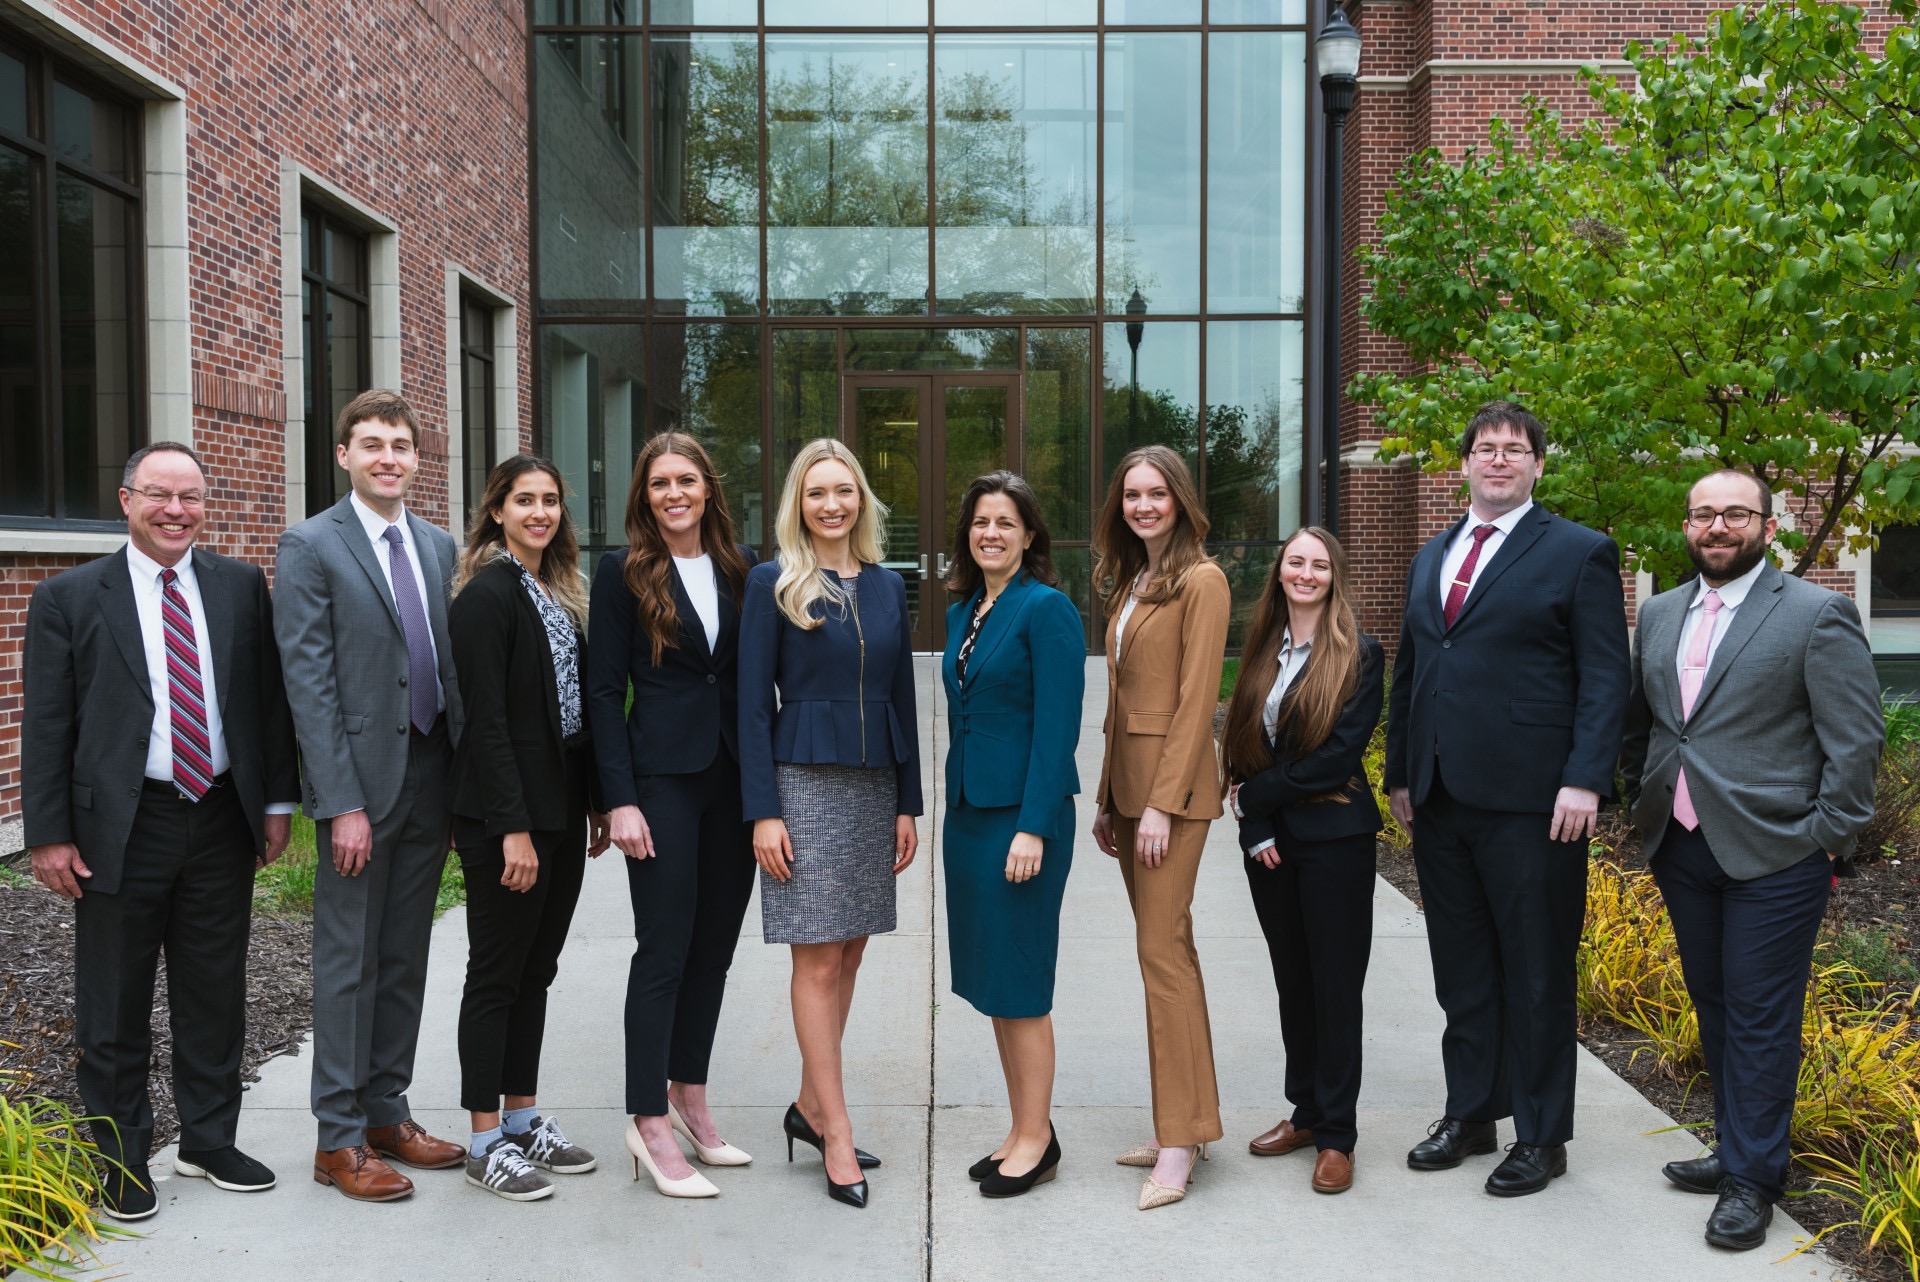 23-24 Law Review Board of Editors